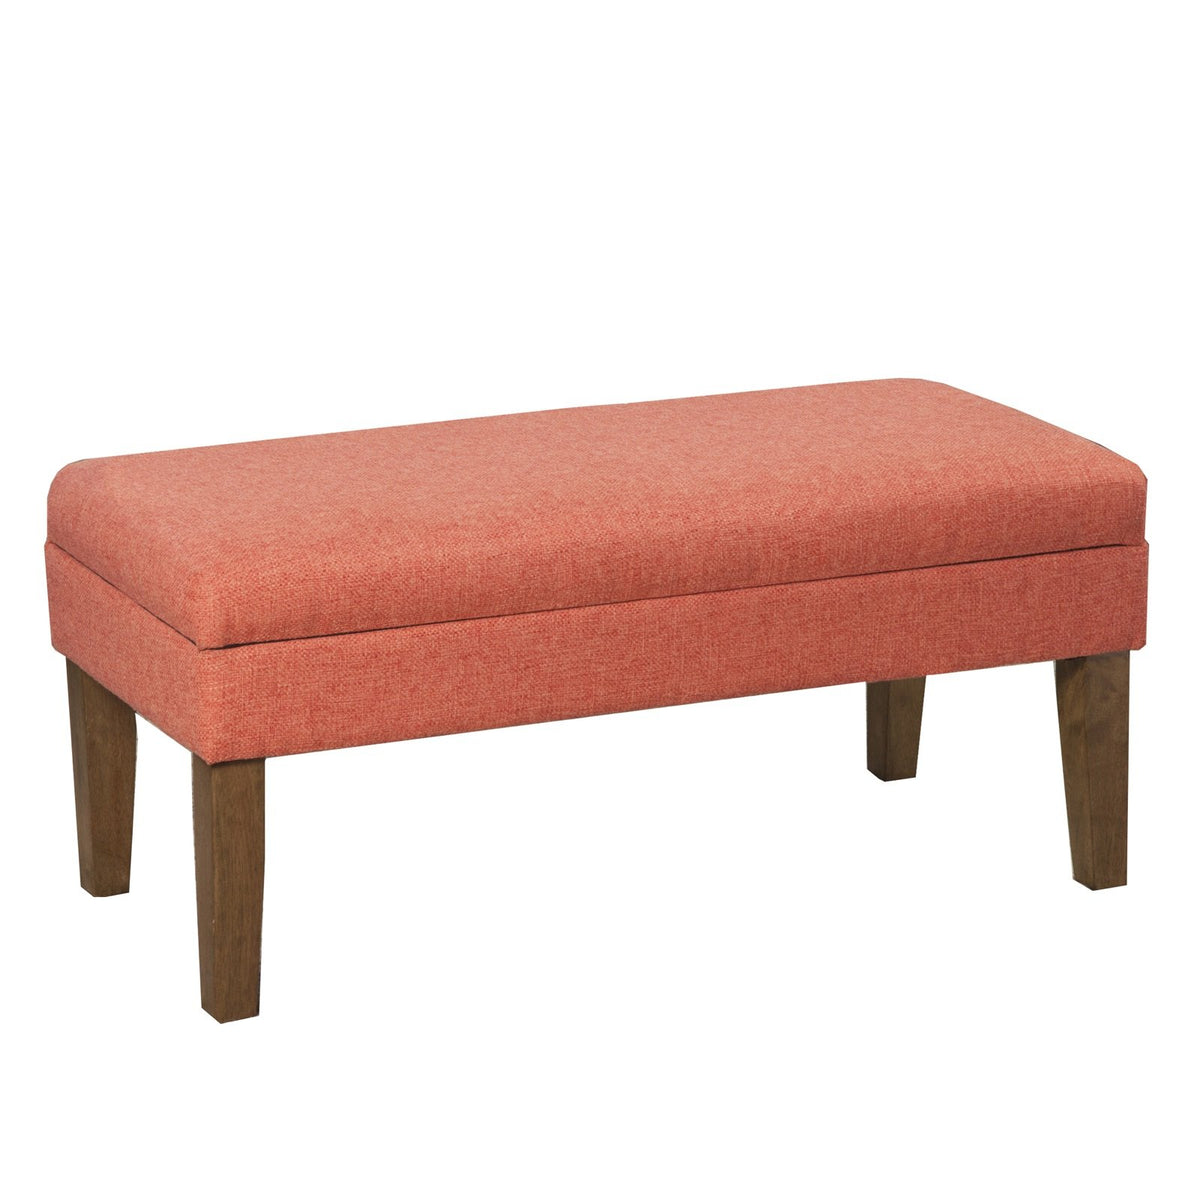 BM194100 - Fabric Upholstered Wooden Bench with Lift Top Storage, Orange